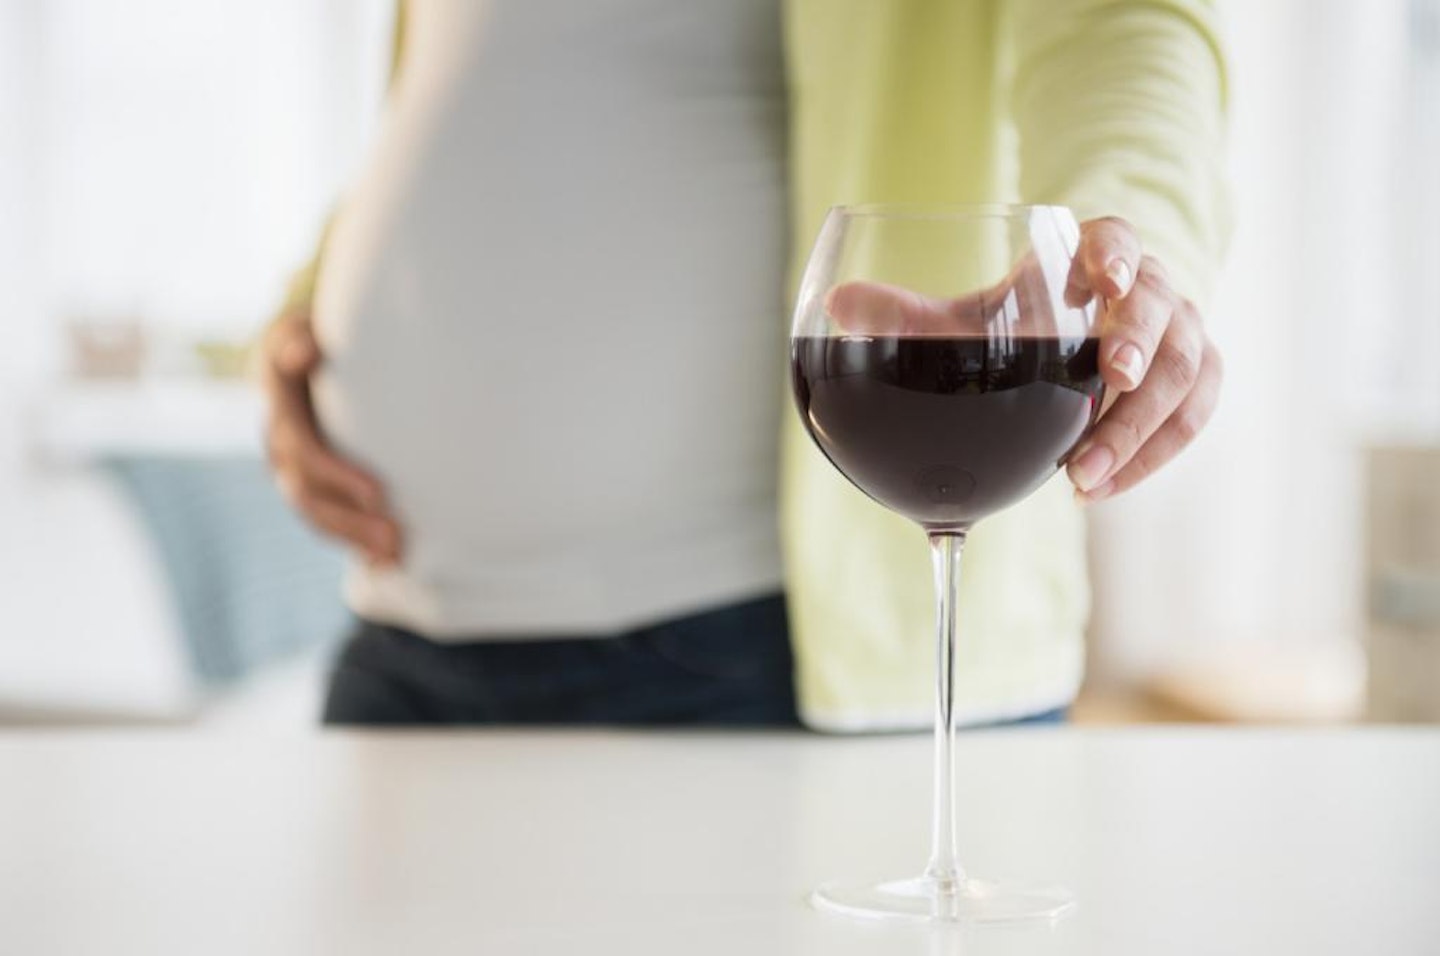 How much can you drink during pregnancy?